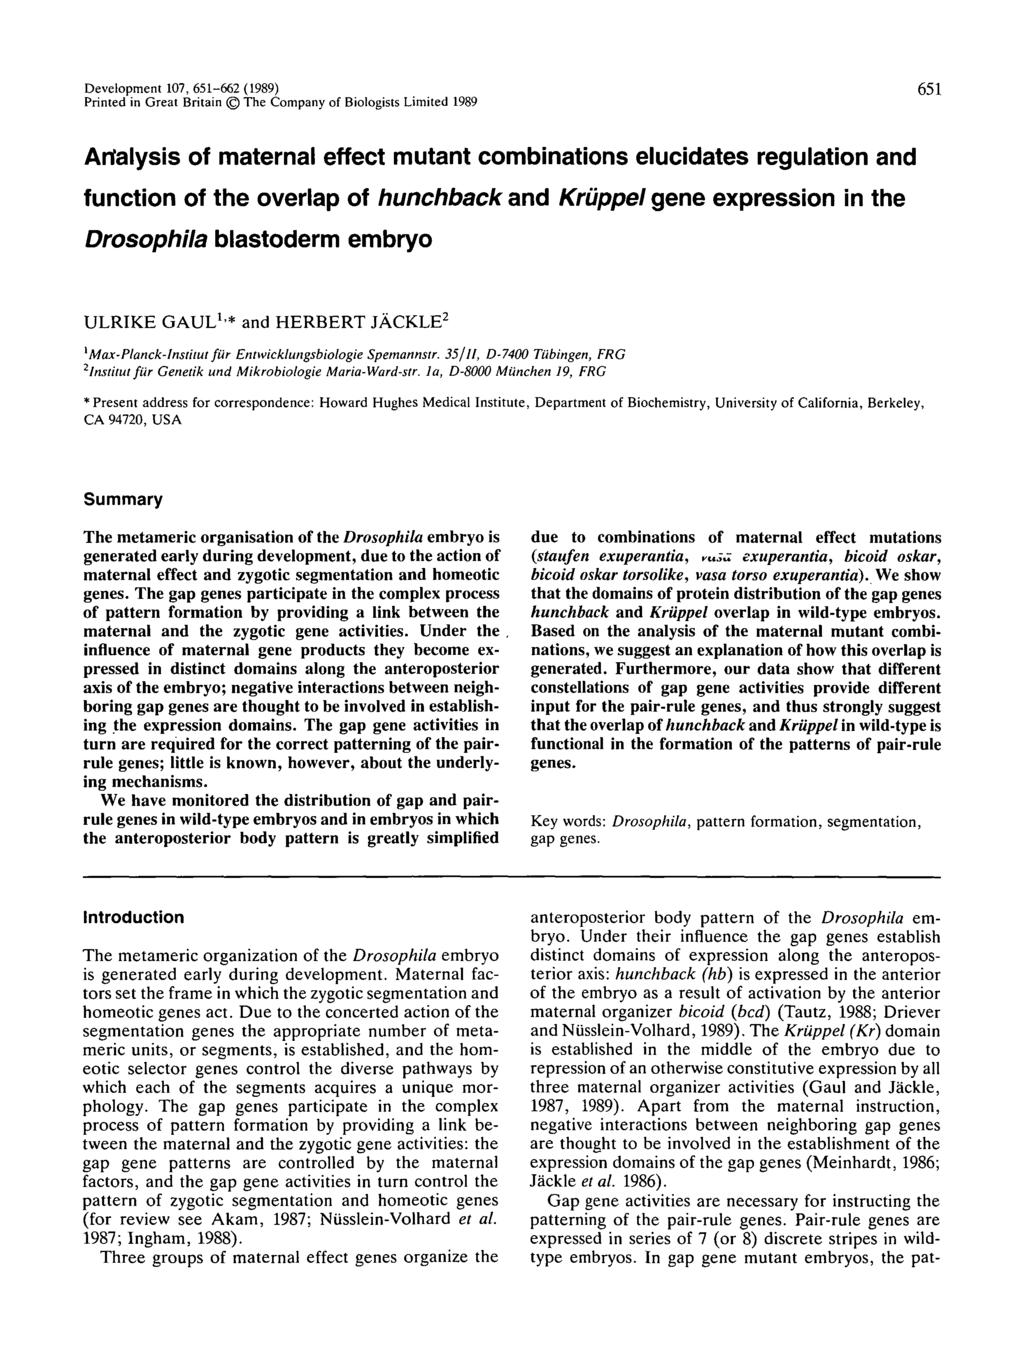 Development 107, 651-662 (1989) Printed in Great Britain The Company of Biologists Limited 1989 651 Analysis of maternal effect mutant combinations elucidates regulation and function of the overlap